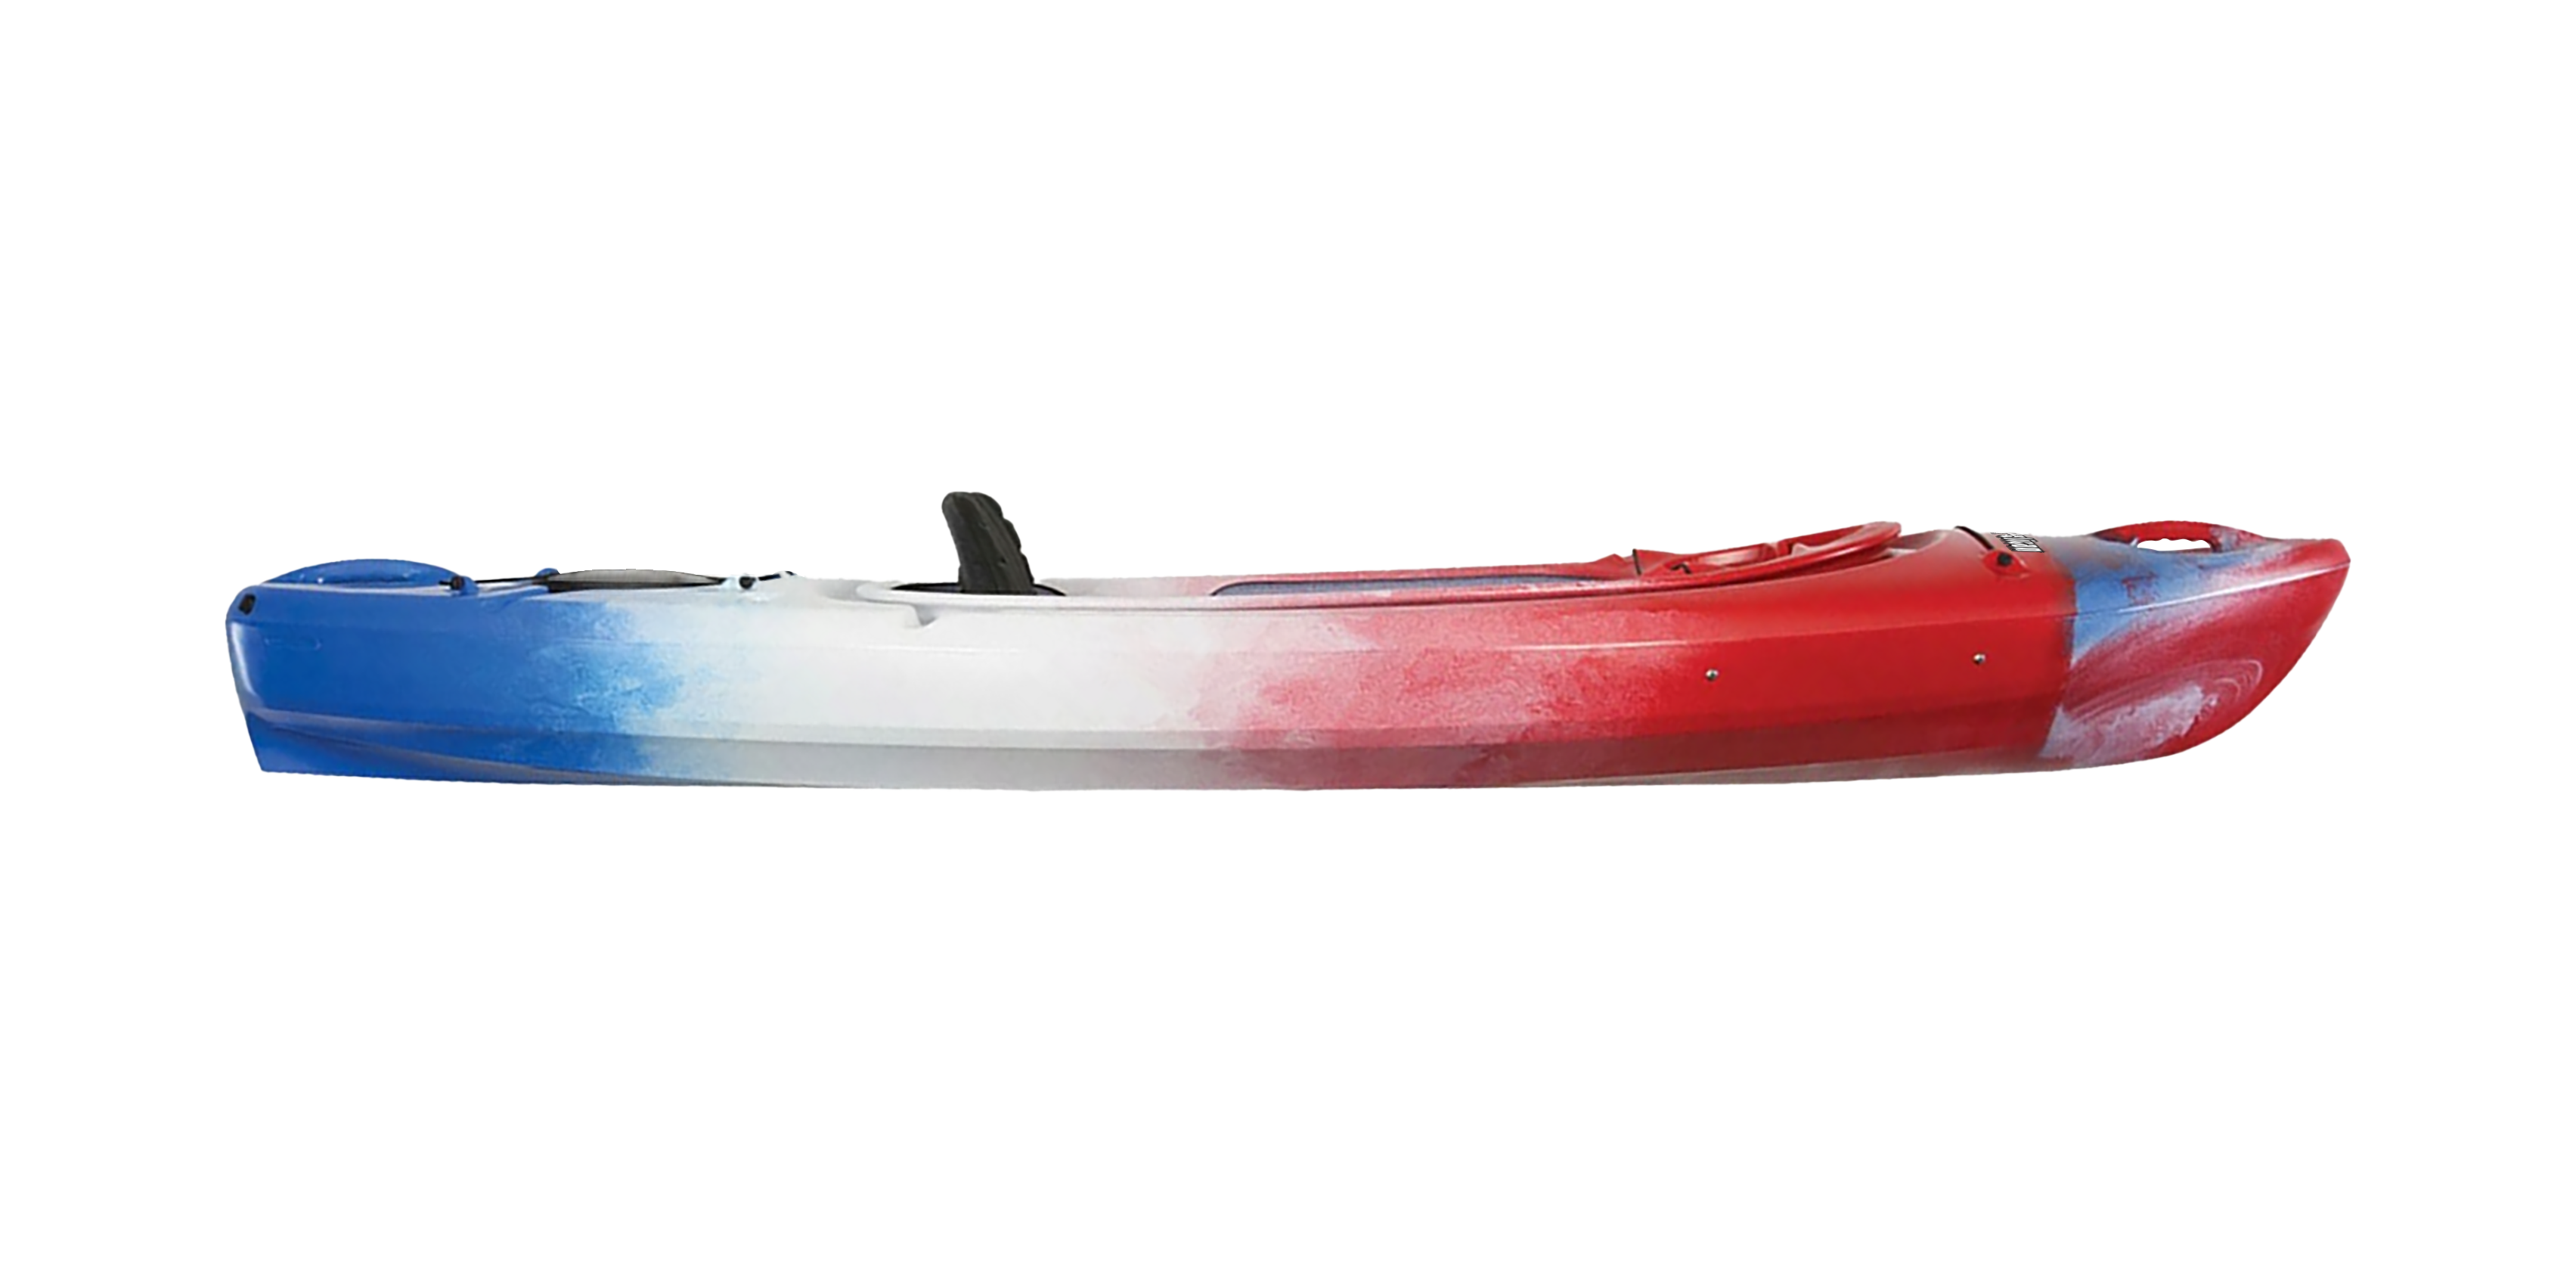 Pelican - Liberty Recreational Kayak - Red White Blue - image 3 of 8